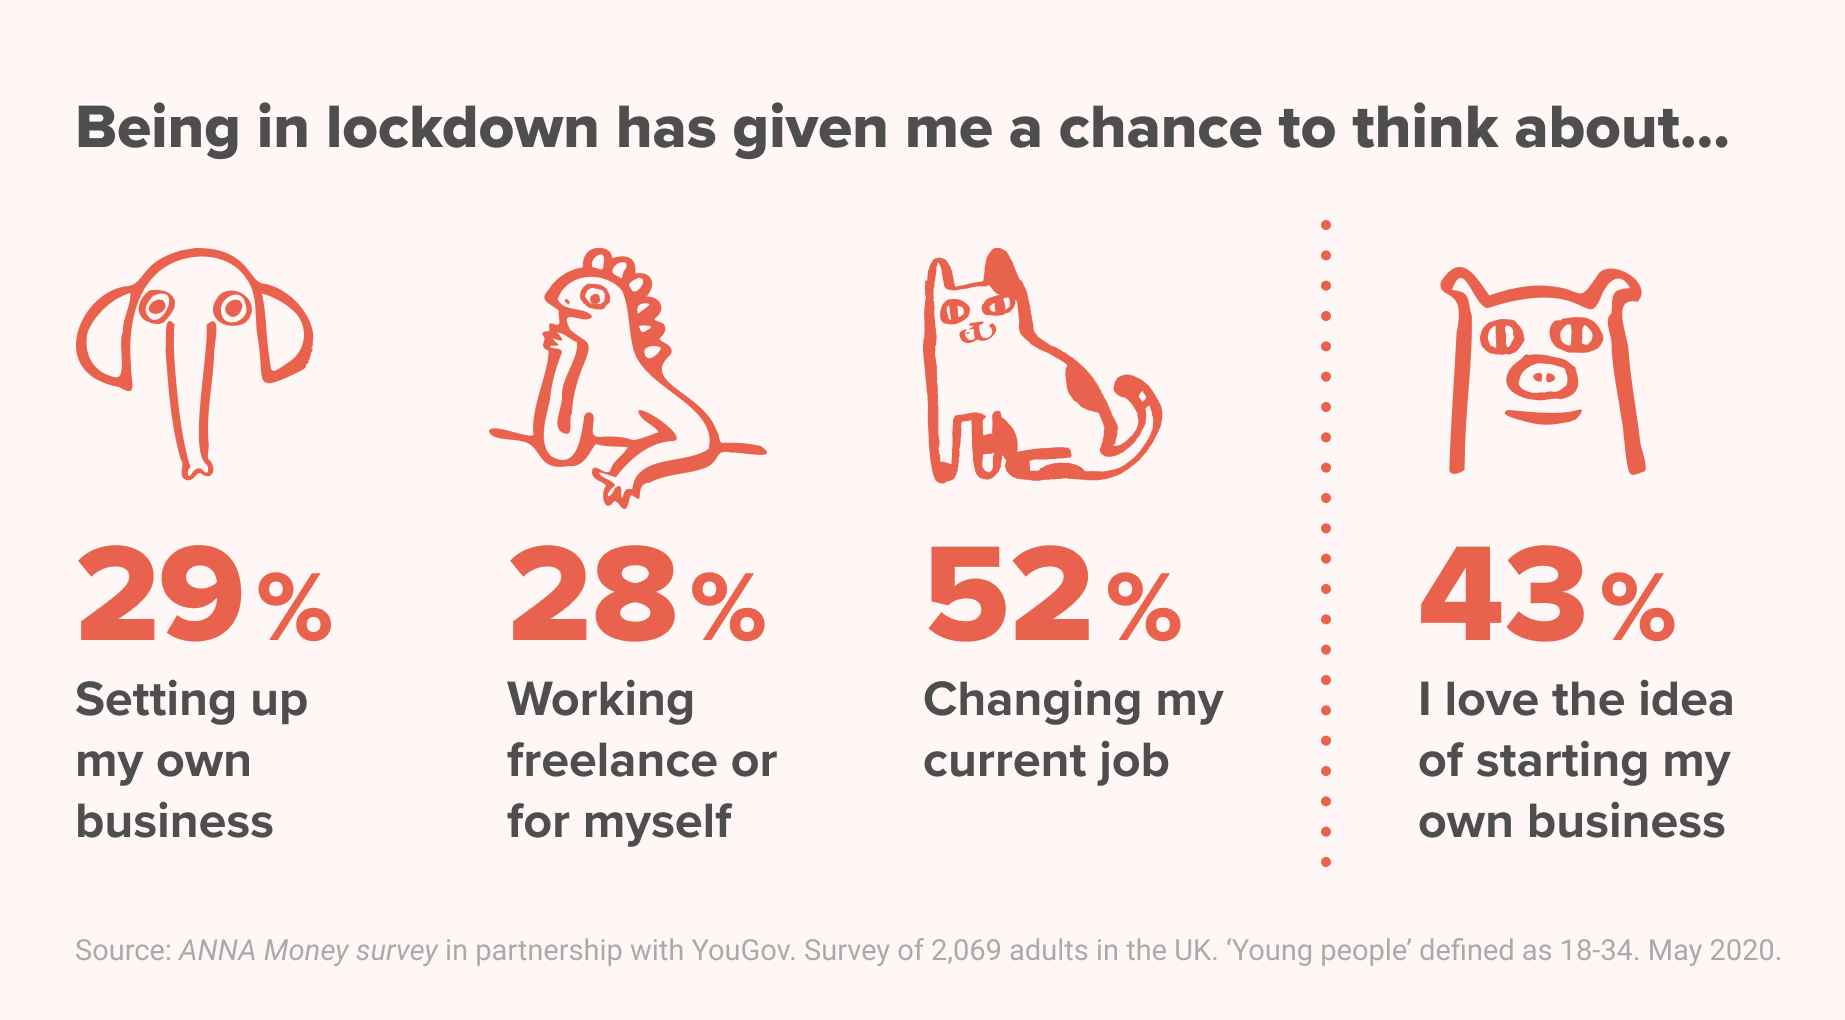 43% of young people love the idea of starting their own business - we love that